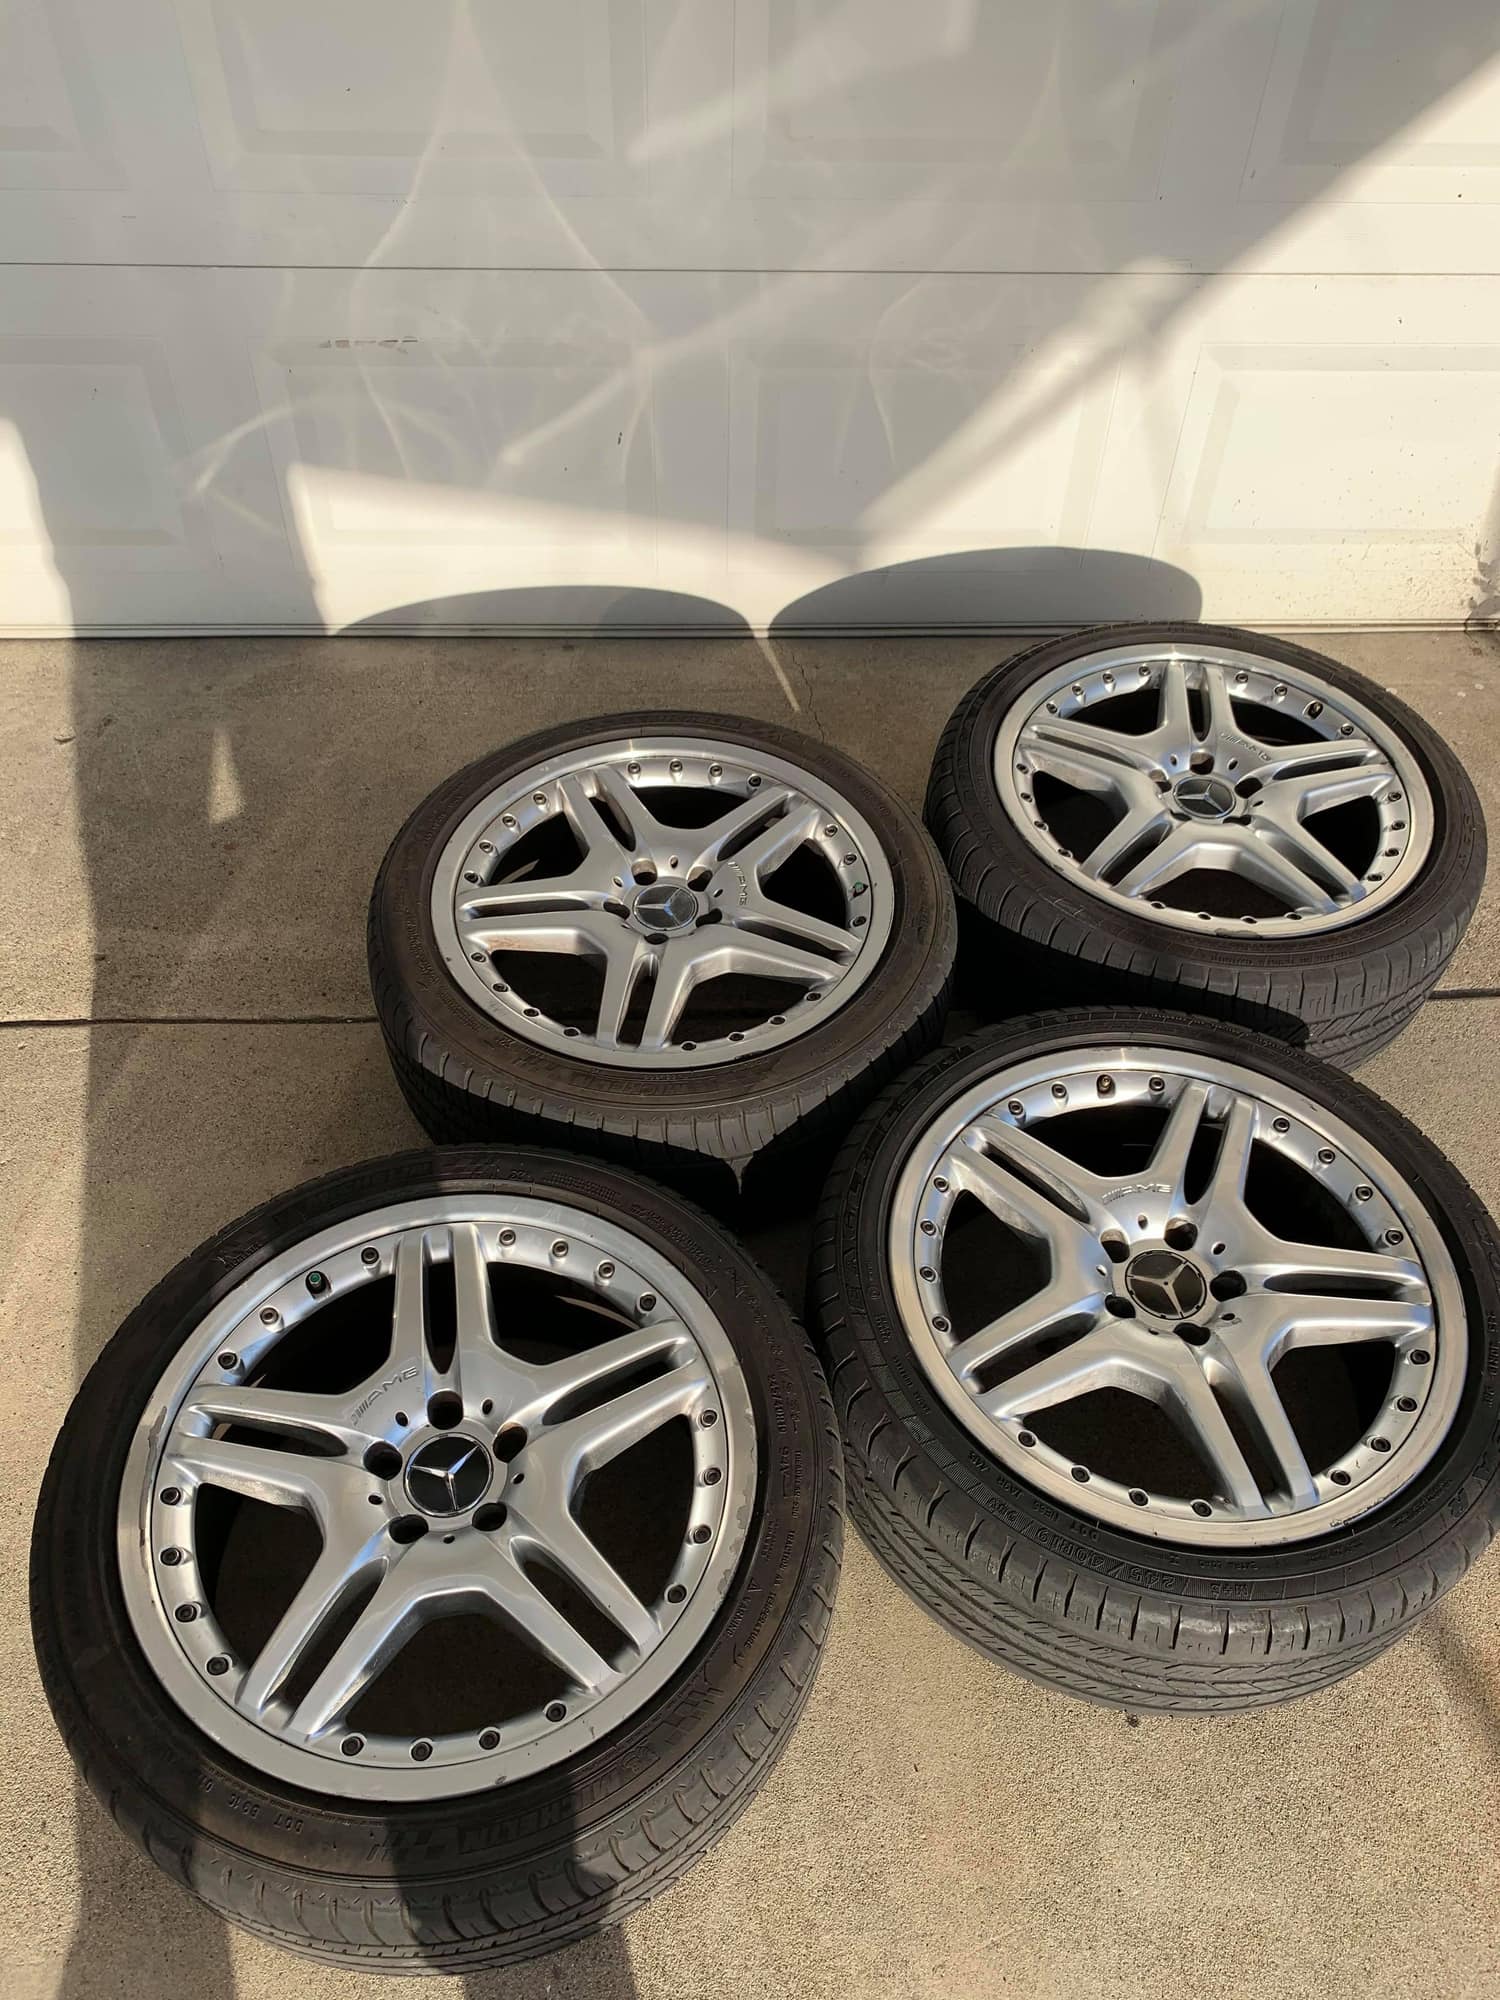 Wheels and Tires/Axles - 19x8.5 2 piece amg wheels and tires $1000 - Used - Gardena, CA 90247, United States